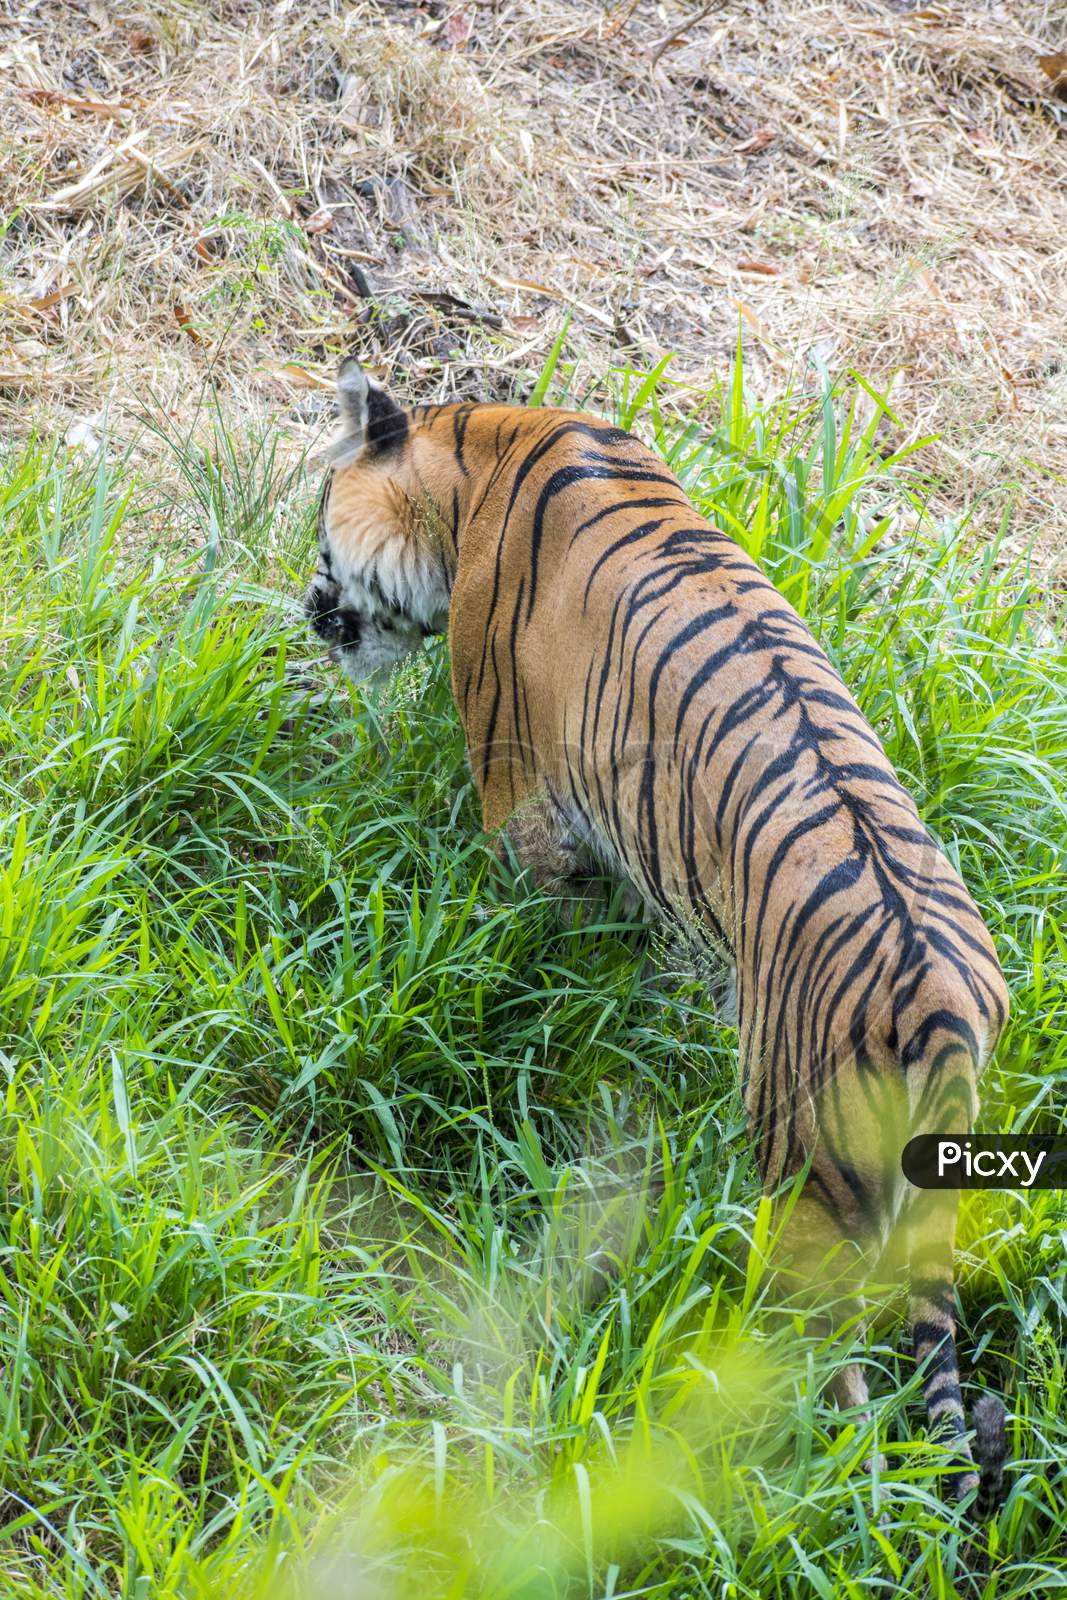 A Rare Image The Tiger Eating Grass In Order To Digest The Meat